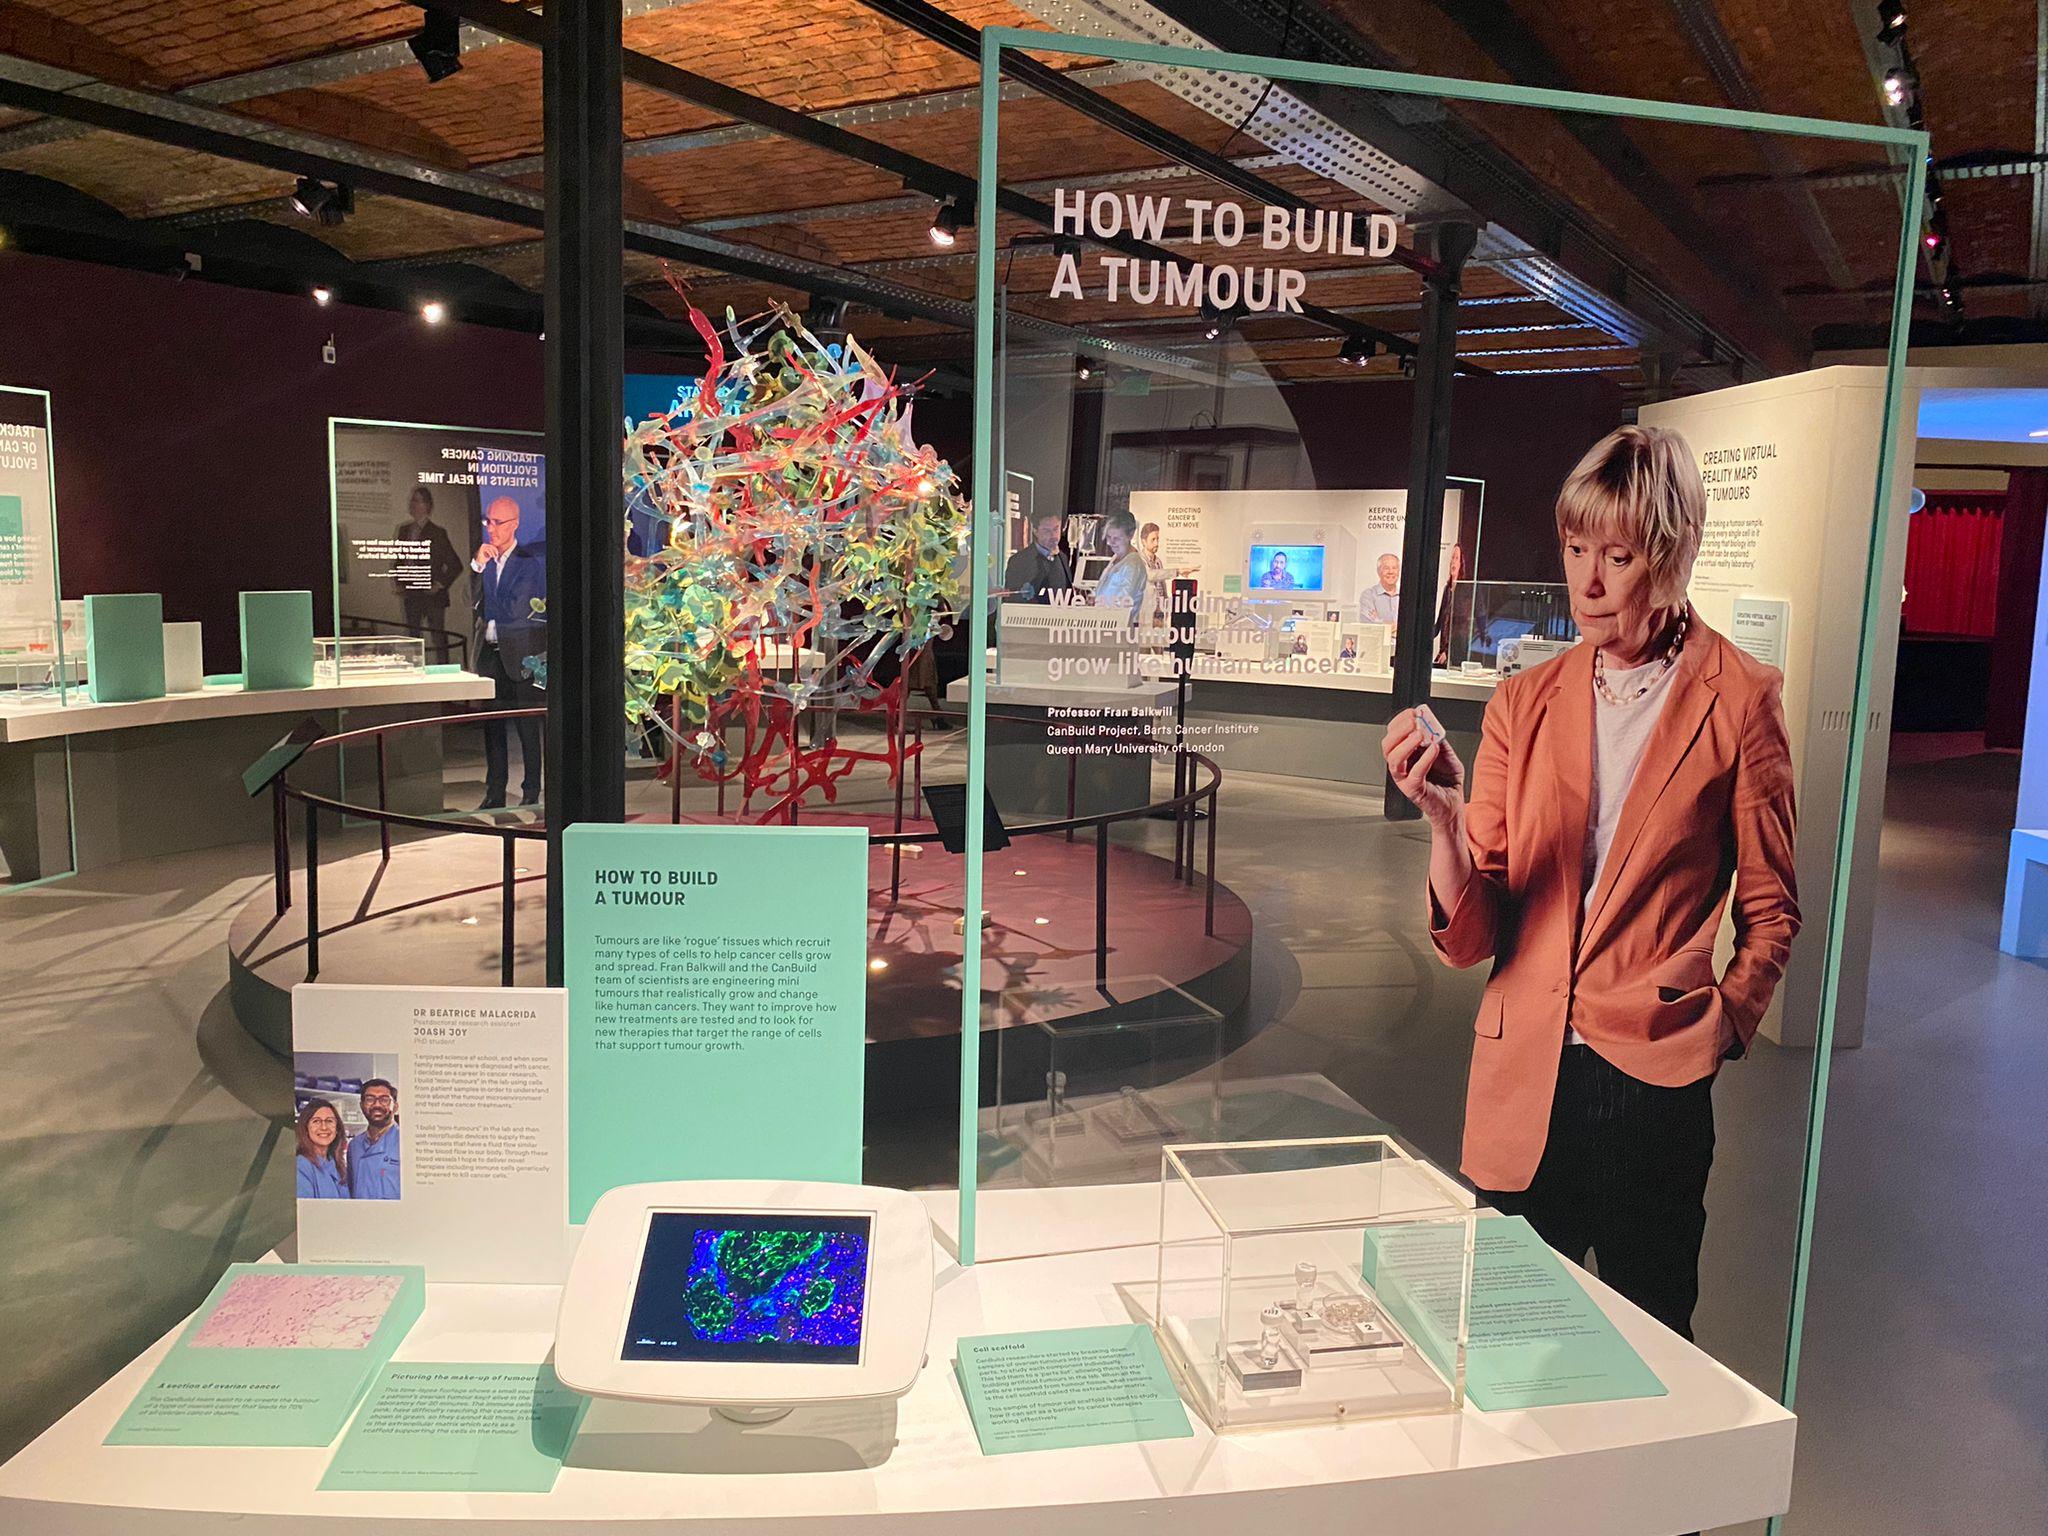 Professor Balkwill featured in the Science Museum's recent 'Cancer Revolution' exhibition.